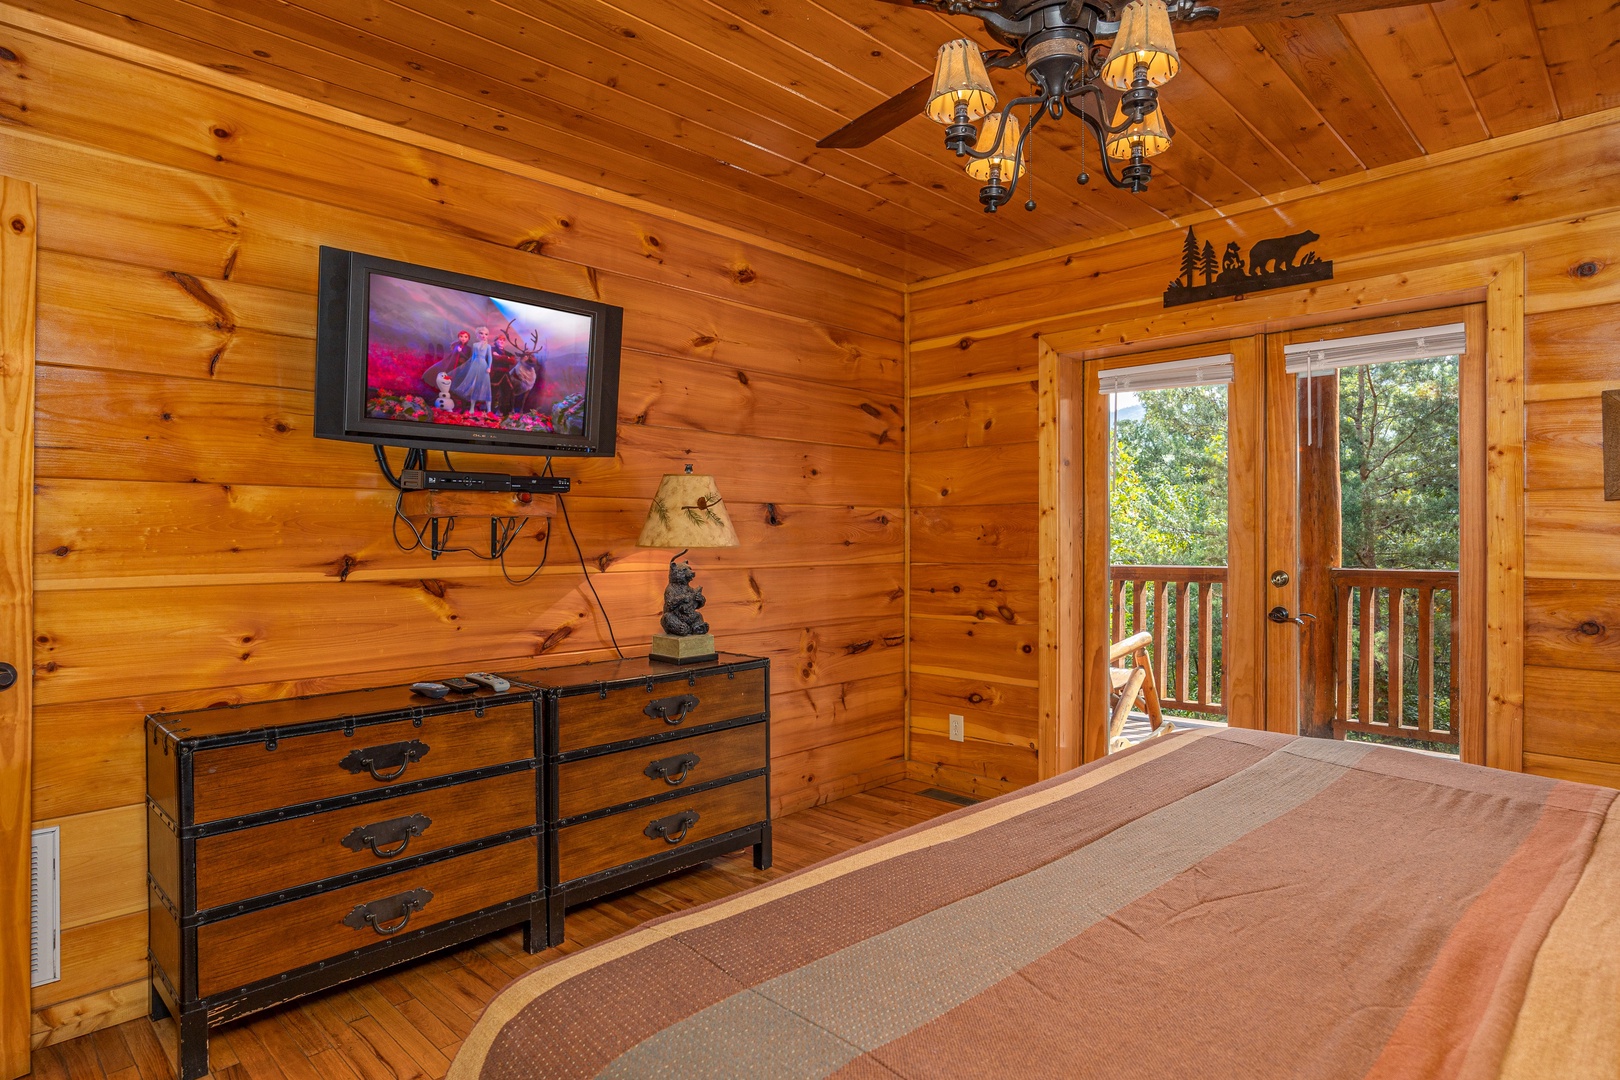 Bedroom amenities at The Great Outdoors, a 3 bedroom cabin rental located in Pigeon Forge